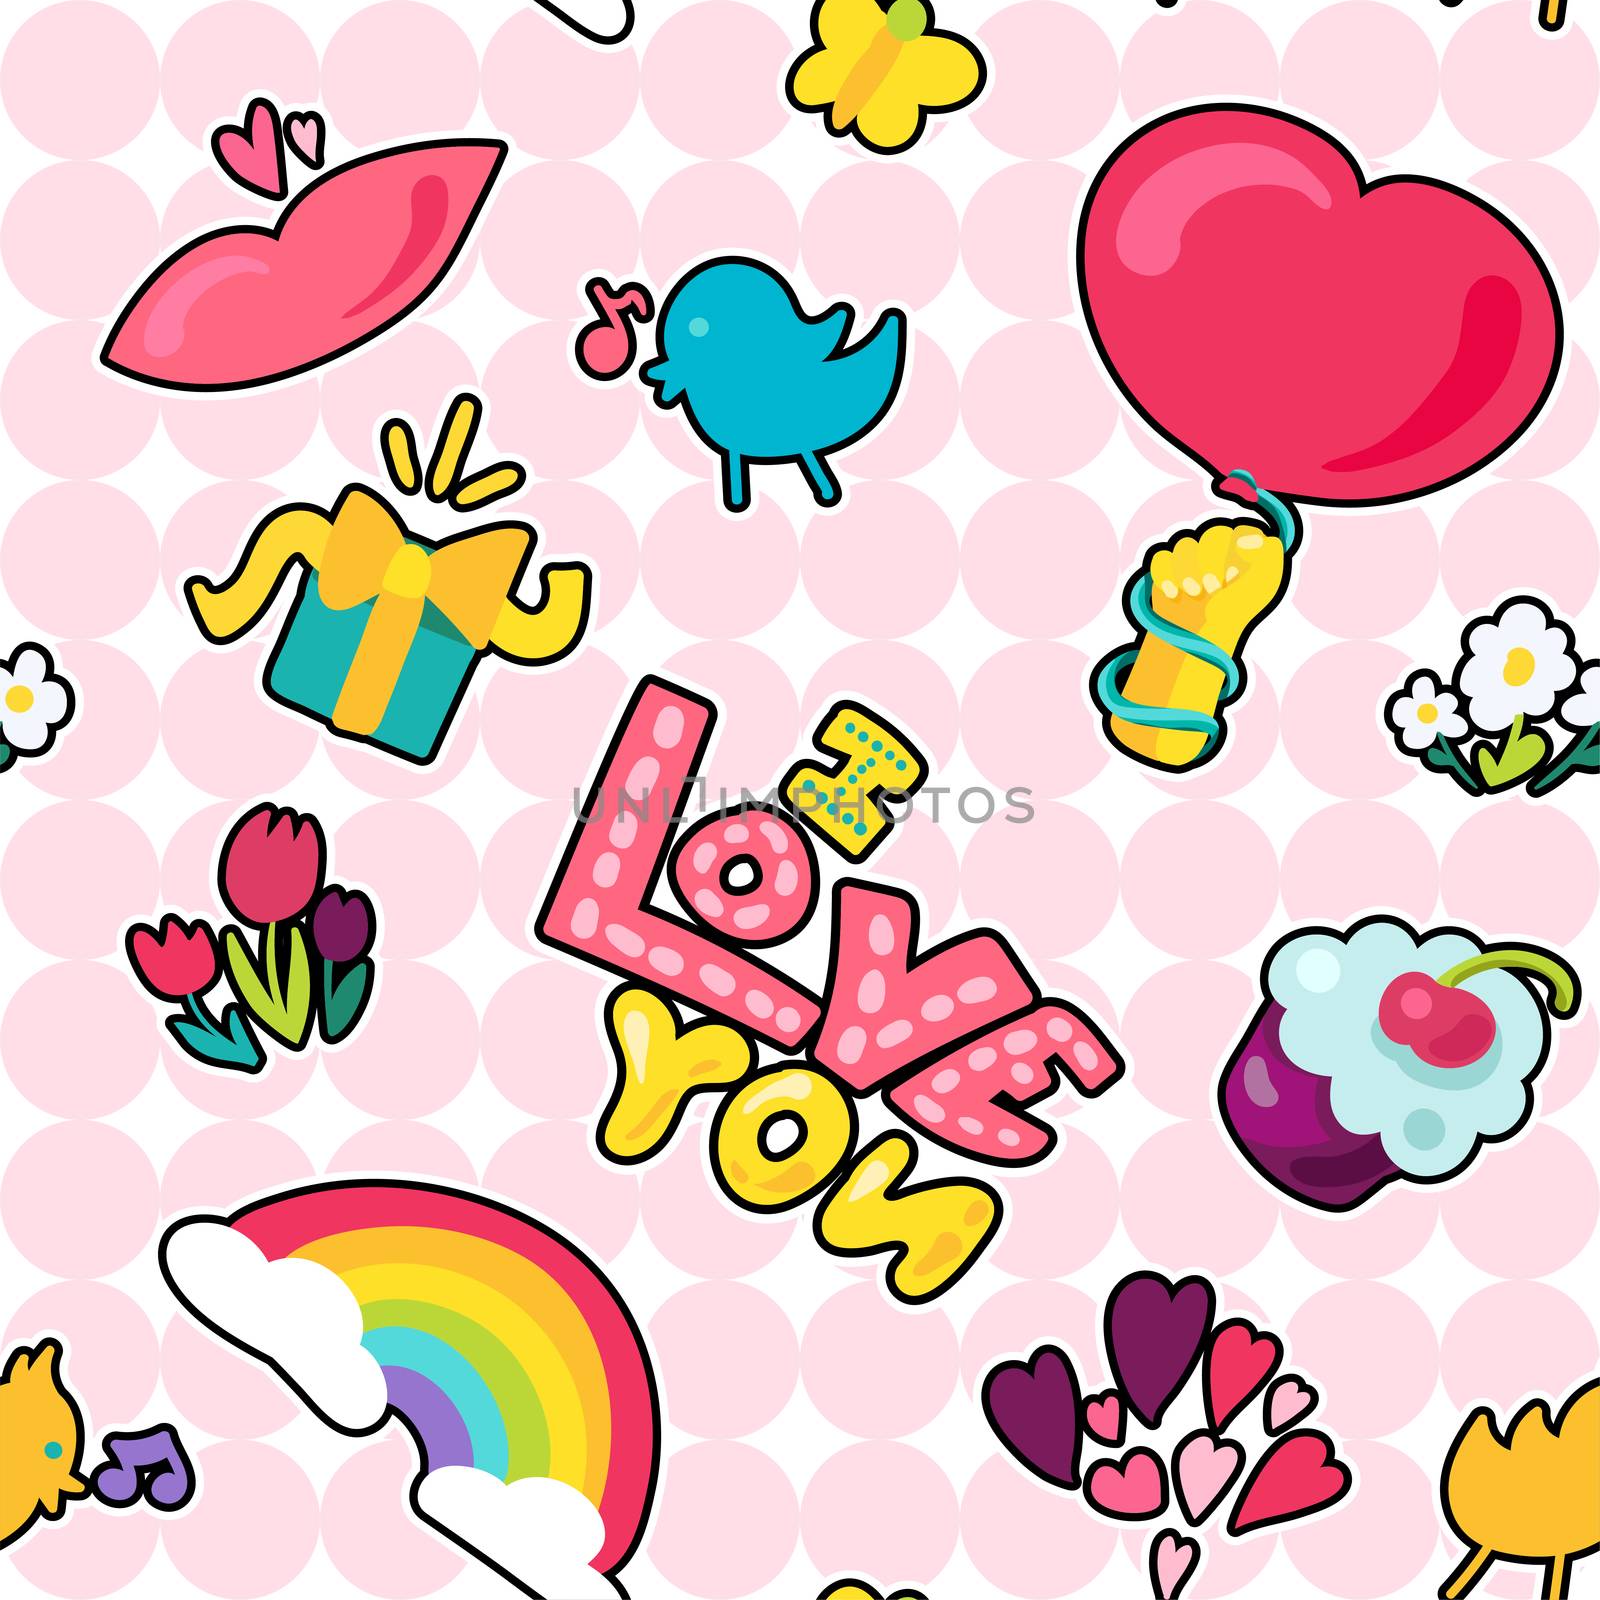 Vector romantic love patch I love you and girl fashion patchworks design. Isolated images of love and heart or rainbow and twit